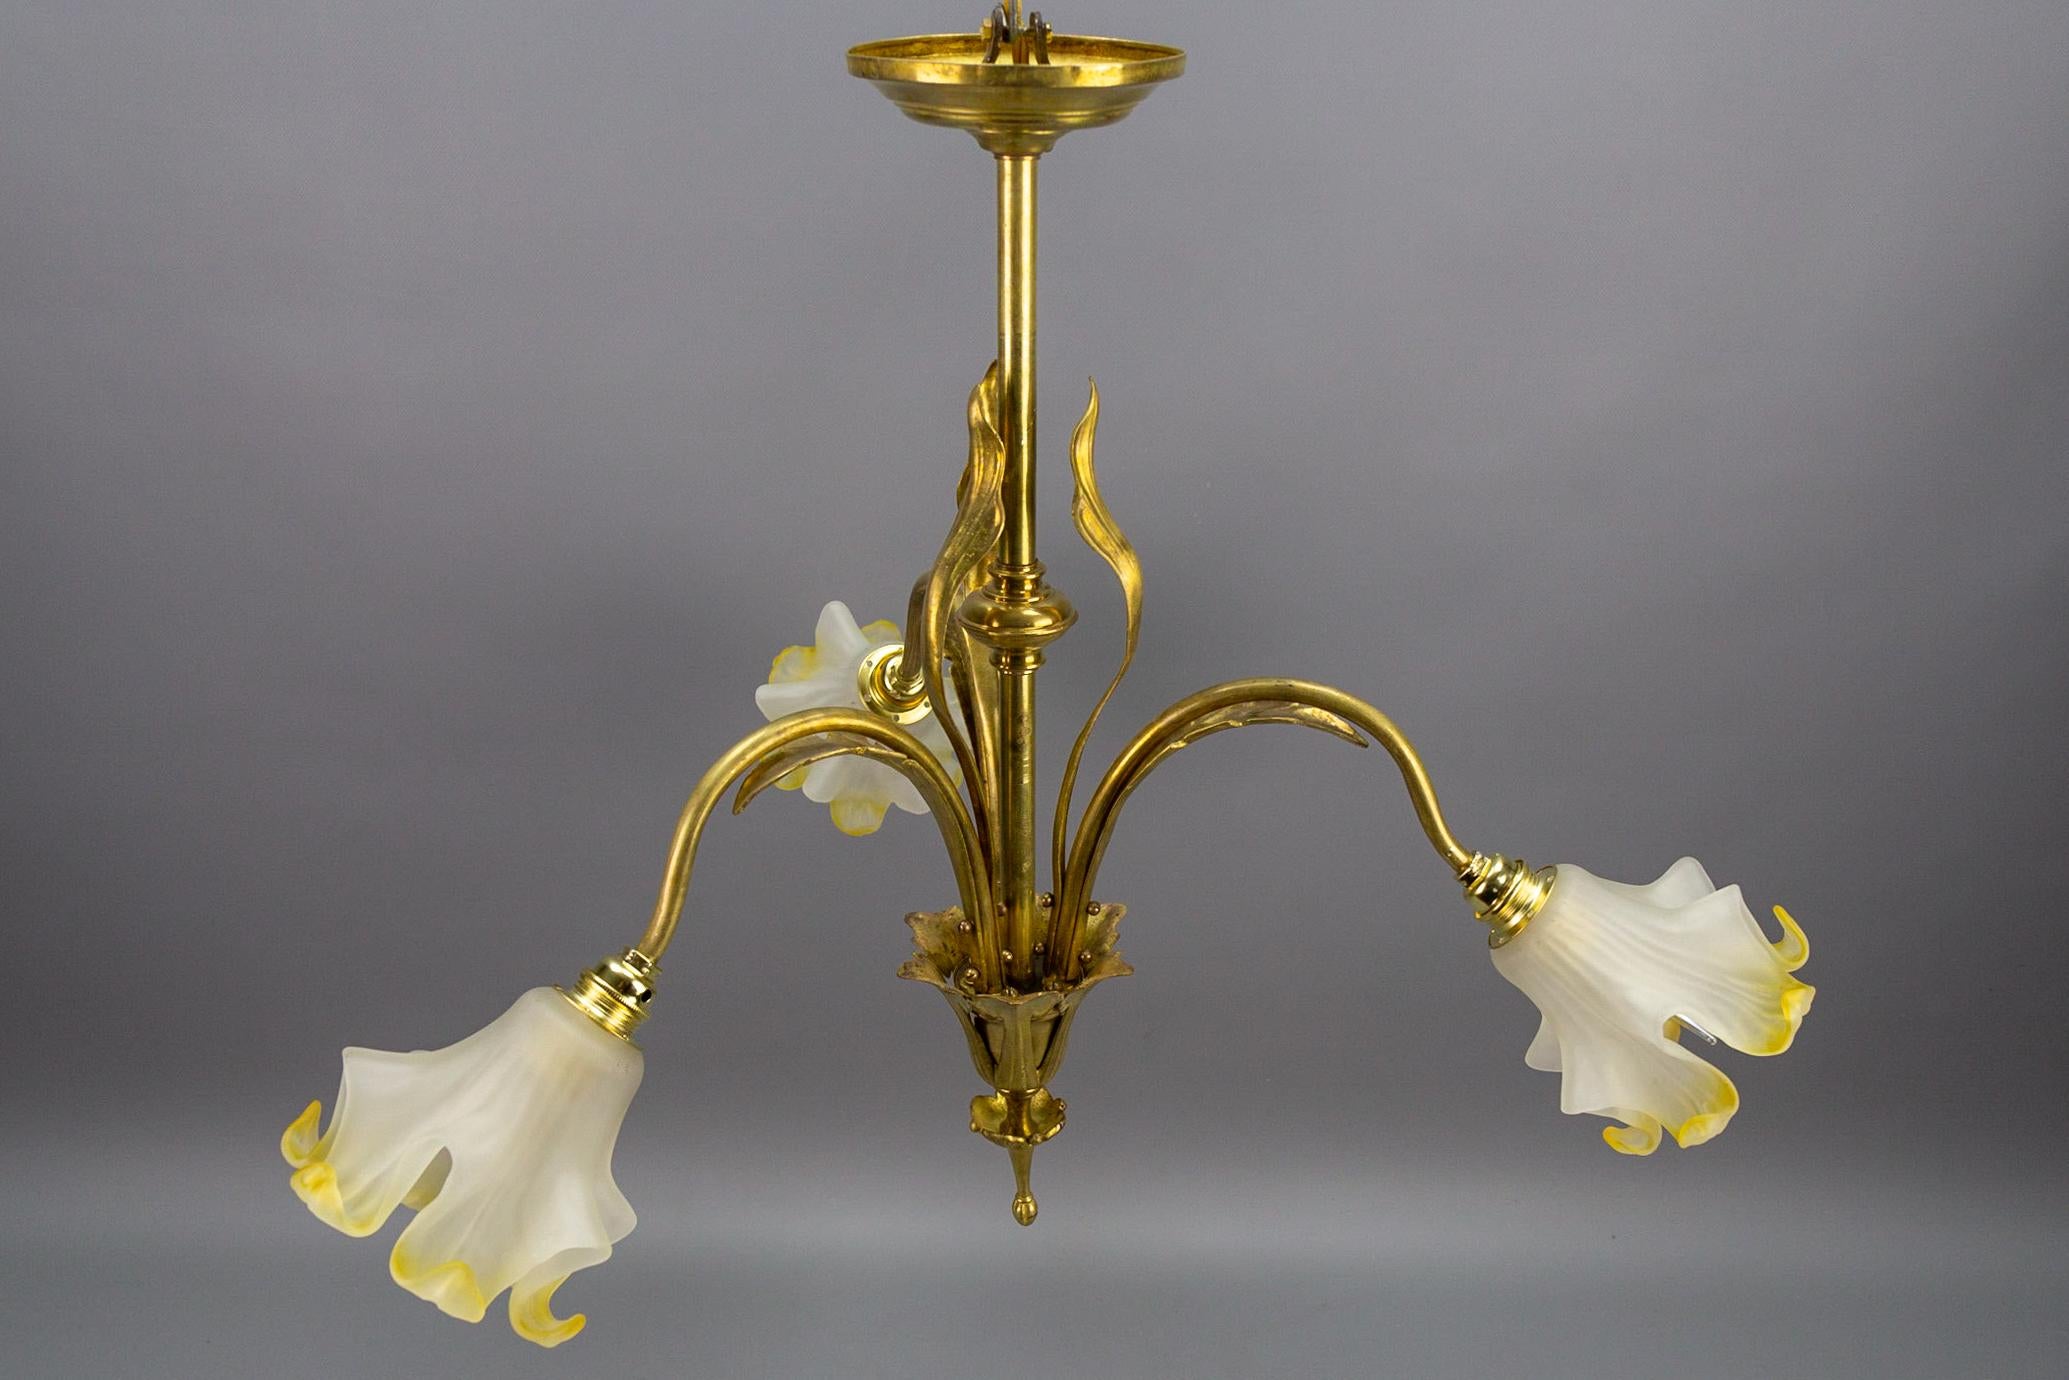 French Art Nouveau Brass and Glass Three-Light Iris-Shaped Chandelier, ca. 1910 For Sale 9